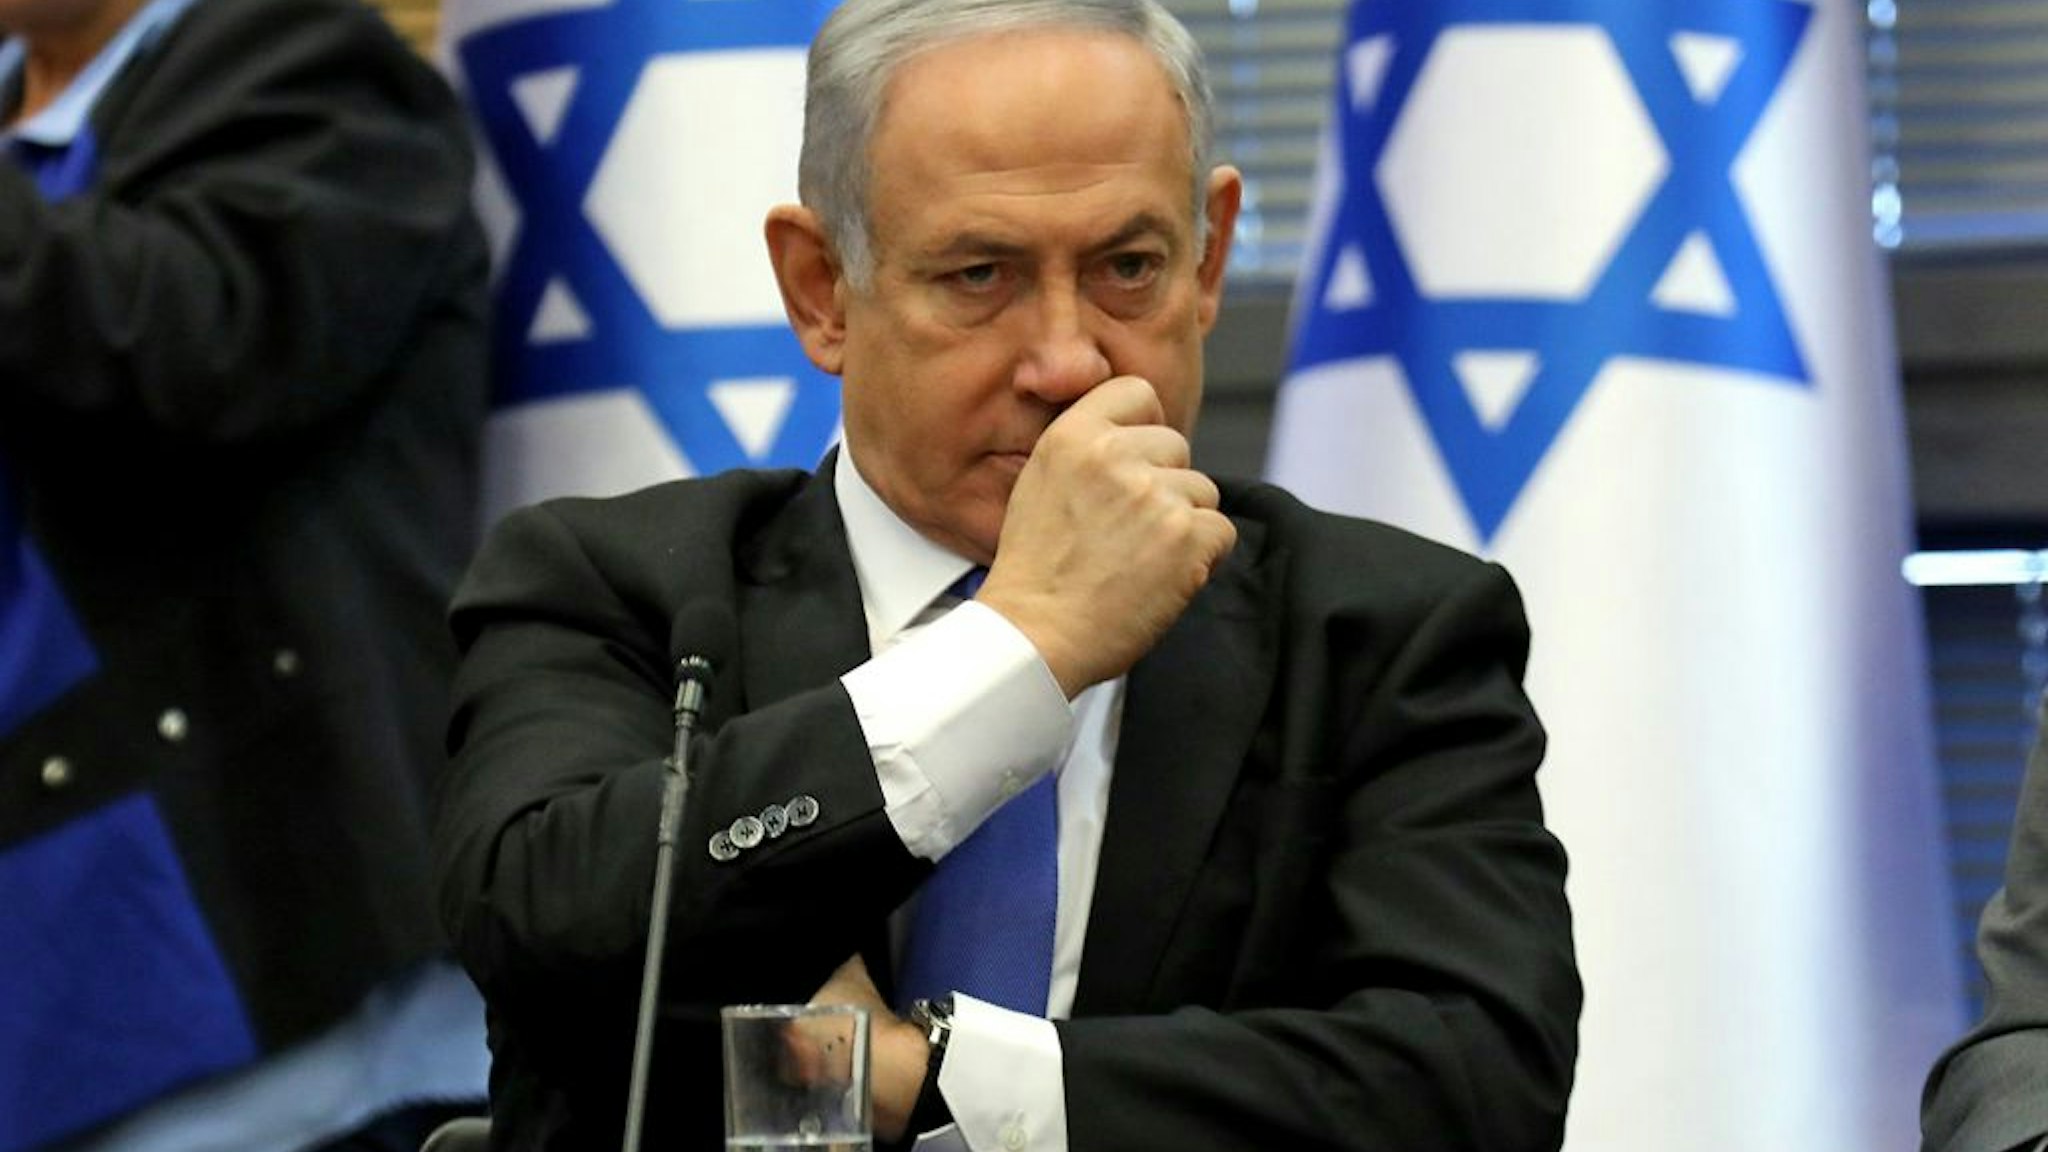 Israeli Prime Minister Benjamin Netanyahu reacts during a meeting of the right-wing bloc at the Knesset (Israeli parliament) in Jerusalem on November 20, 2019.